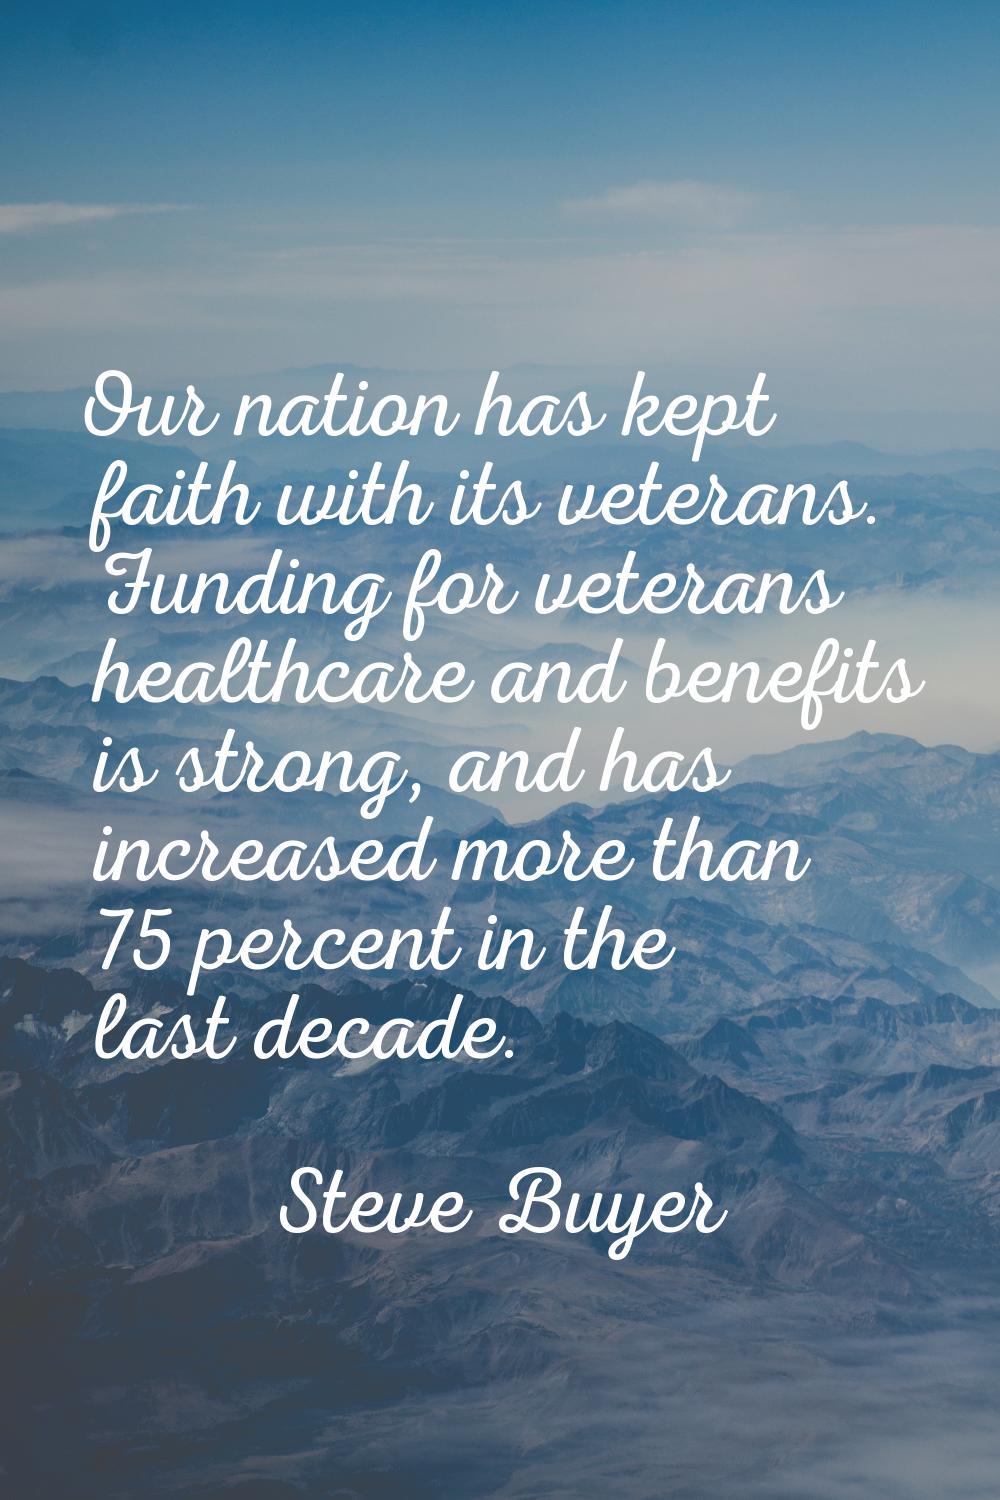 Our nation has kept faith with its veterans. Funding for veterans healthcare and benefits is strong